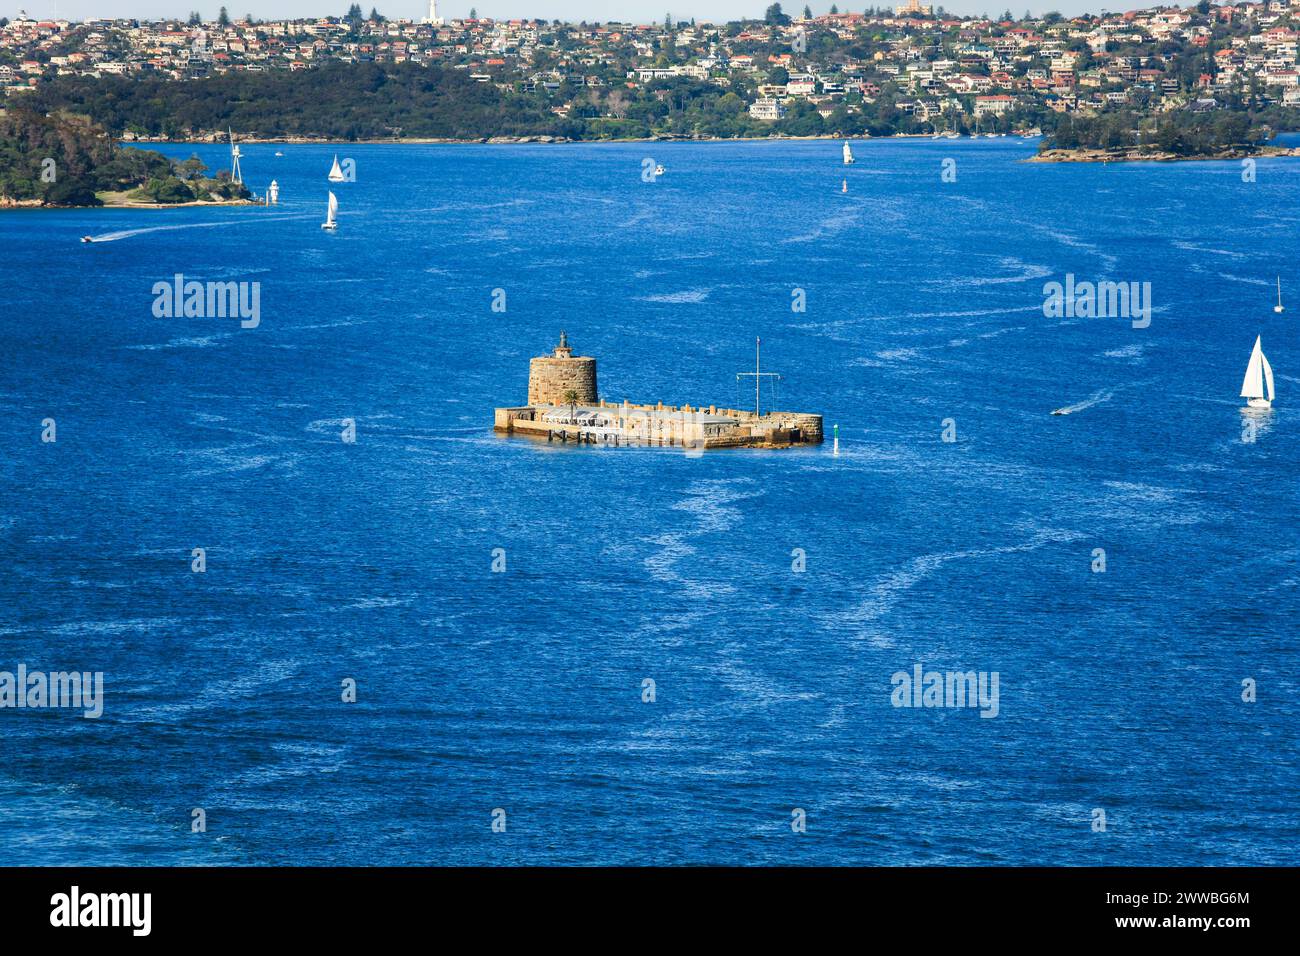 Fort Denison in Sydney Harbour, Australia.  Small island and national park, heritage-listed former penal site and defensive facility. Stock Photo